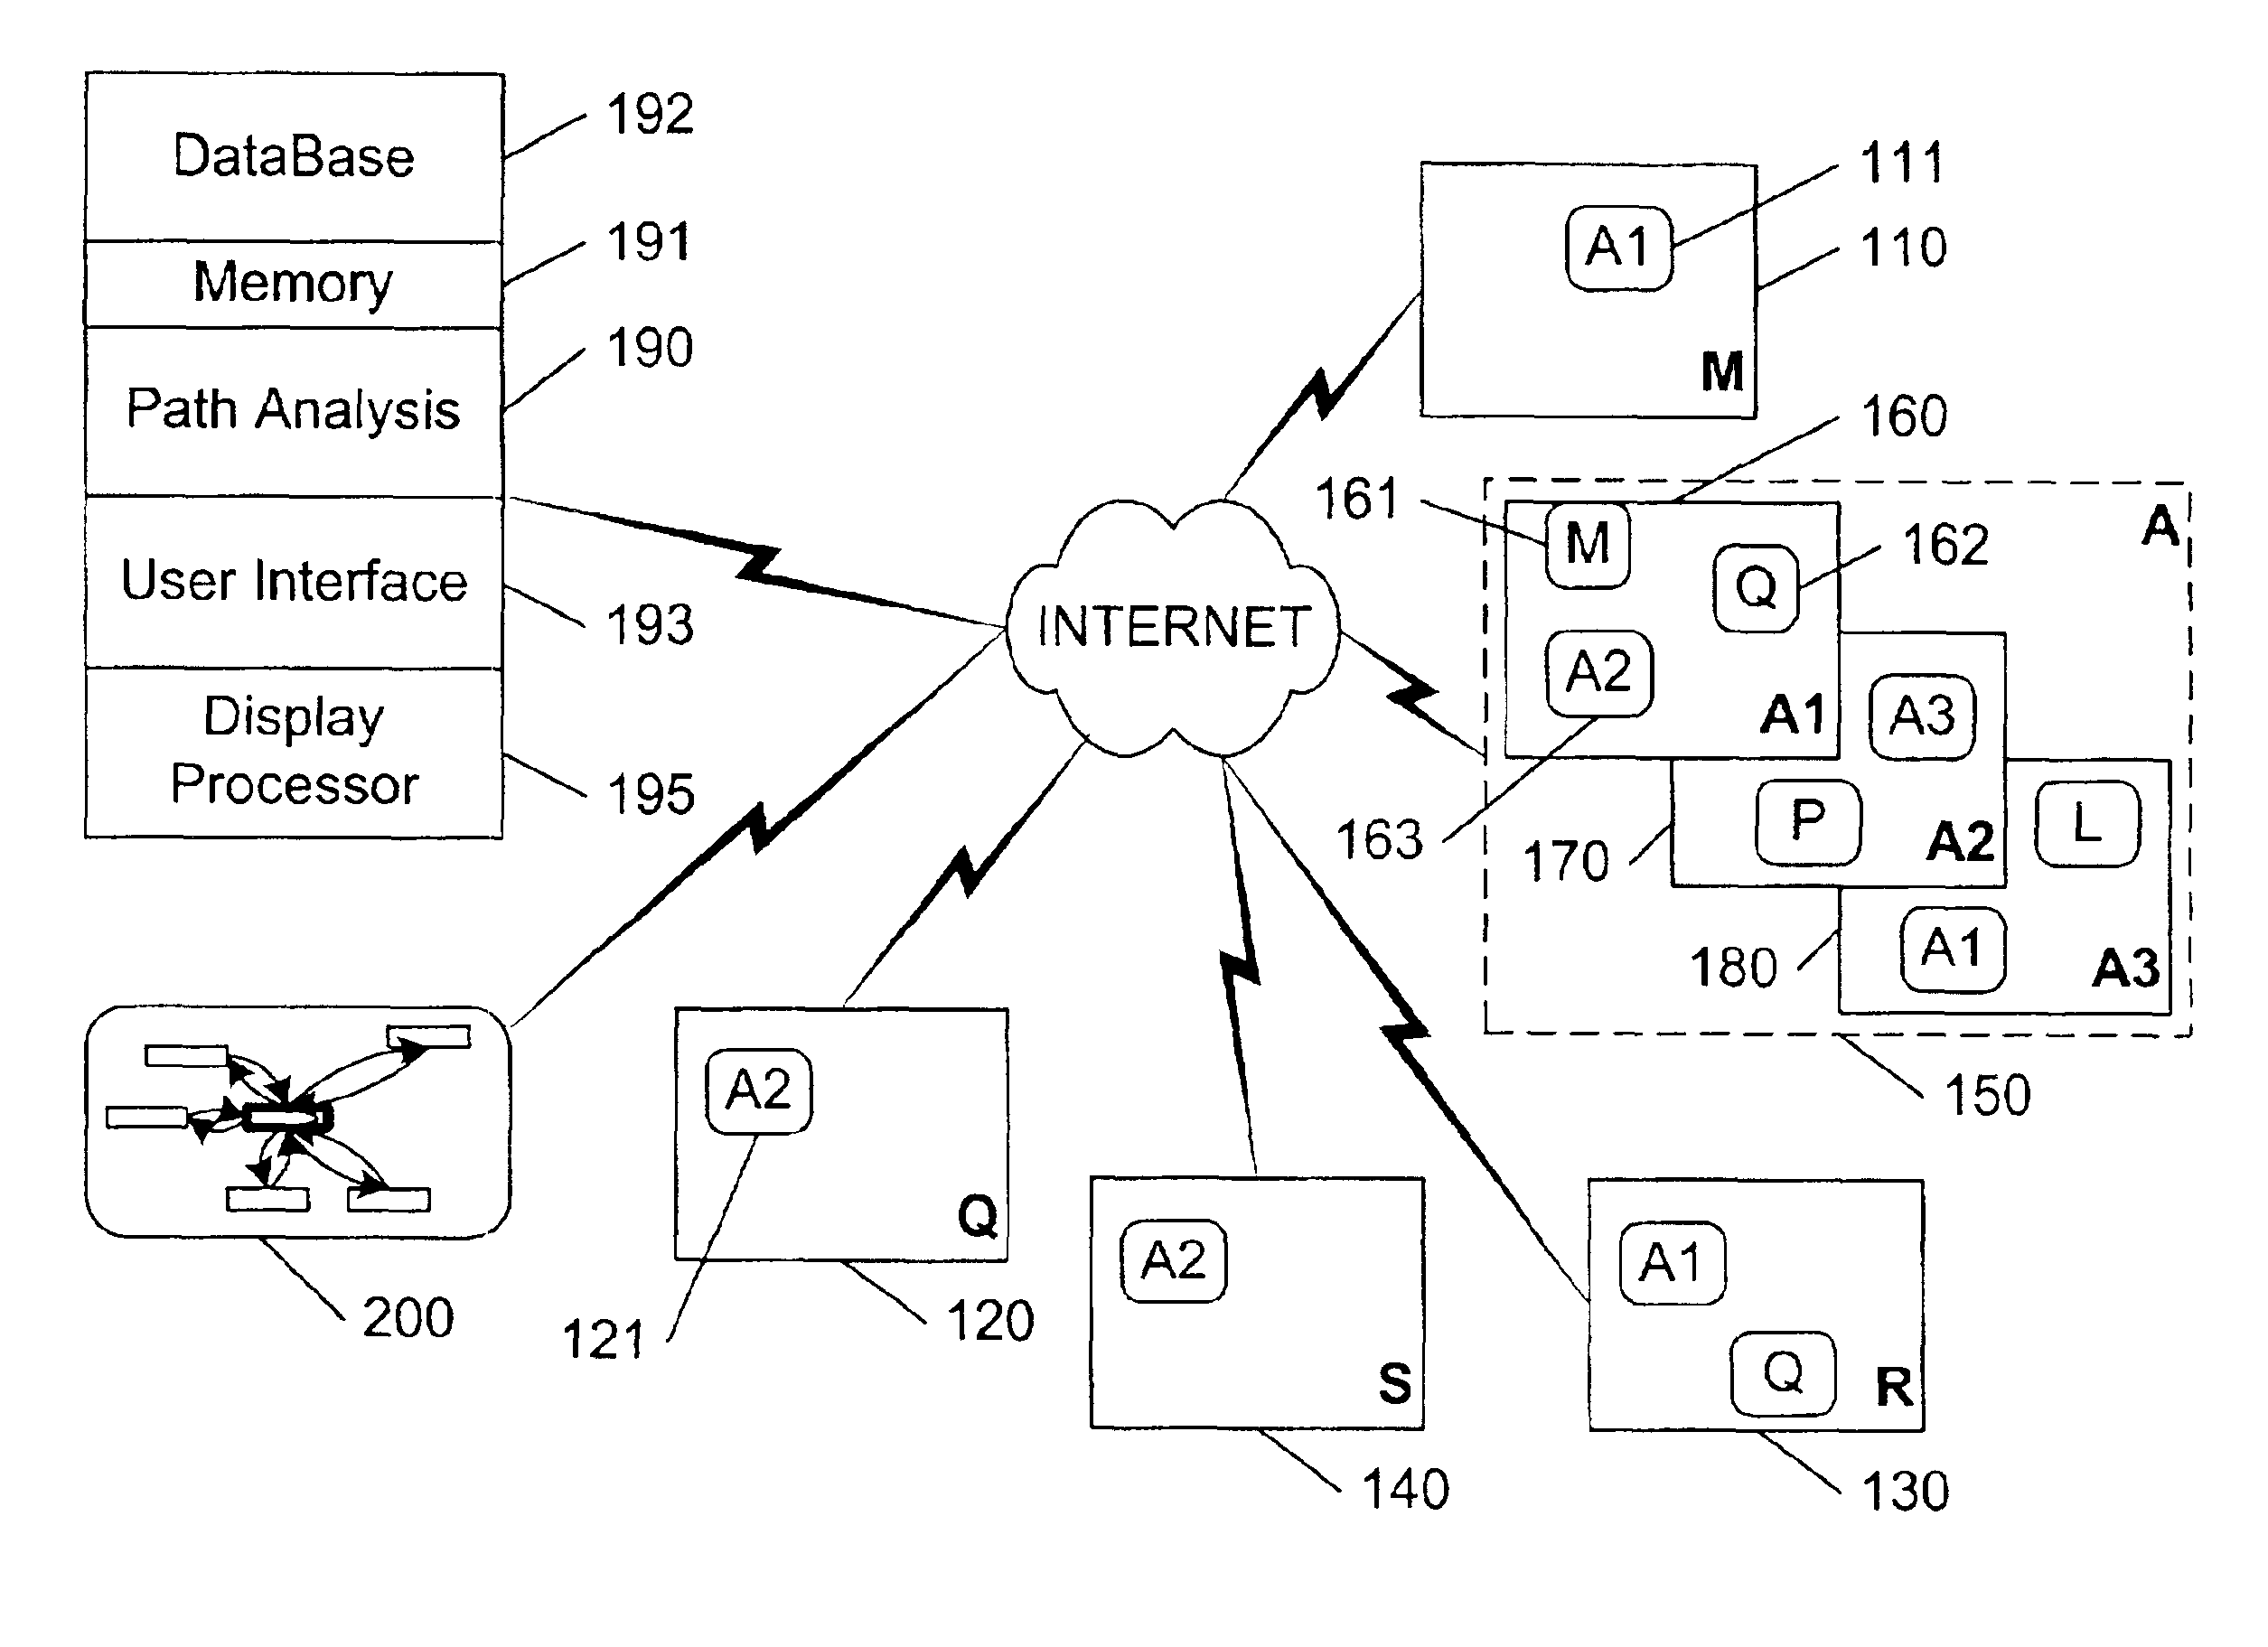 Web-site performance analysis system and method utilizing web-site traversal counters and histograms